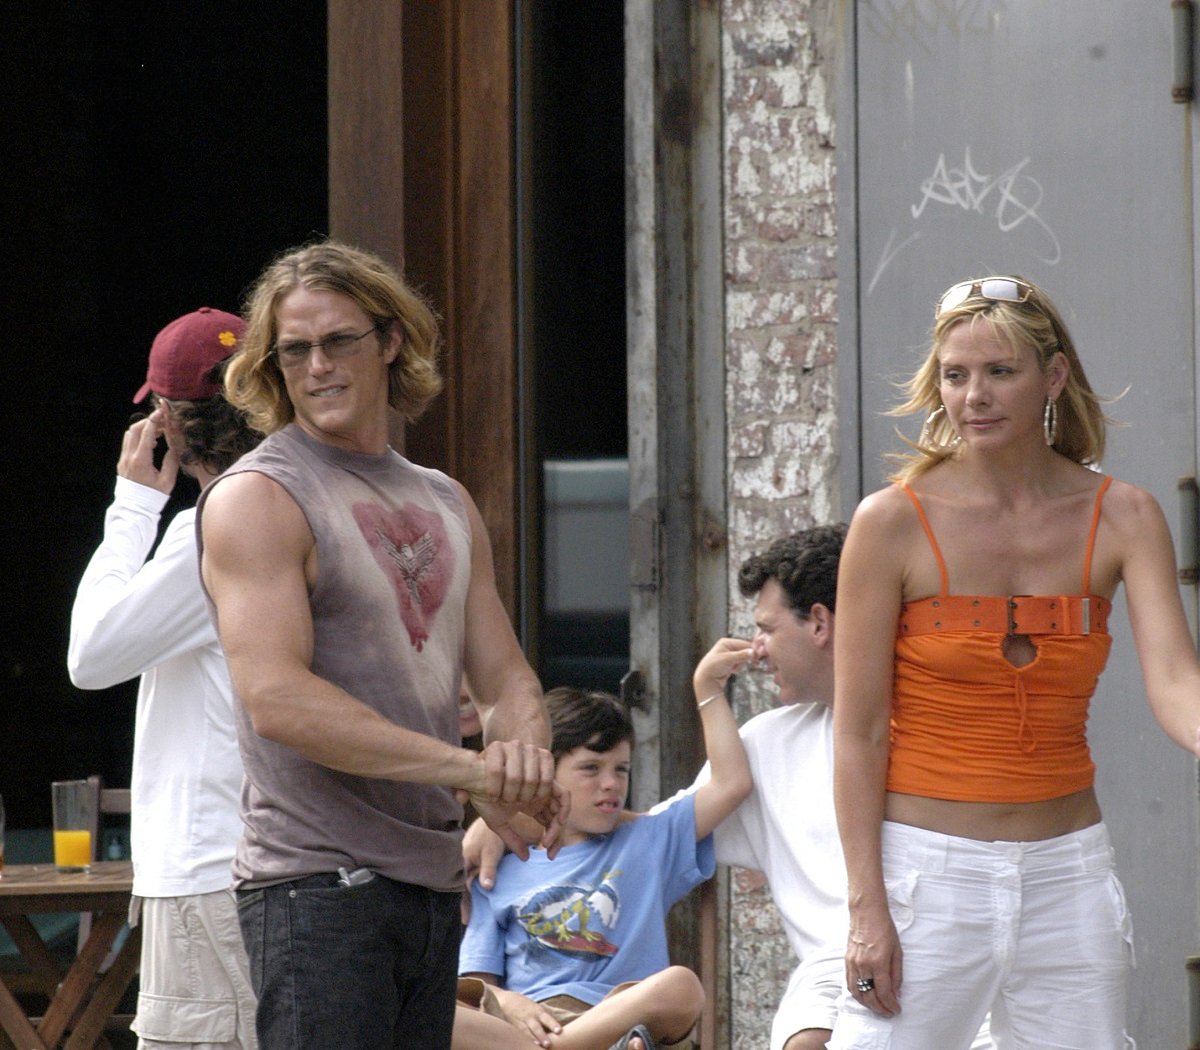 Jason Lewis as Smith Jerrod and Kim Cattrall as Samantha Jones film together in the Meatpacking District, close to where Samantha's fictional apartment was located in 'Sex and the City'